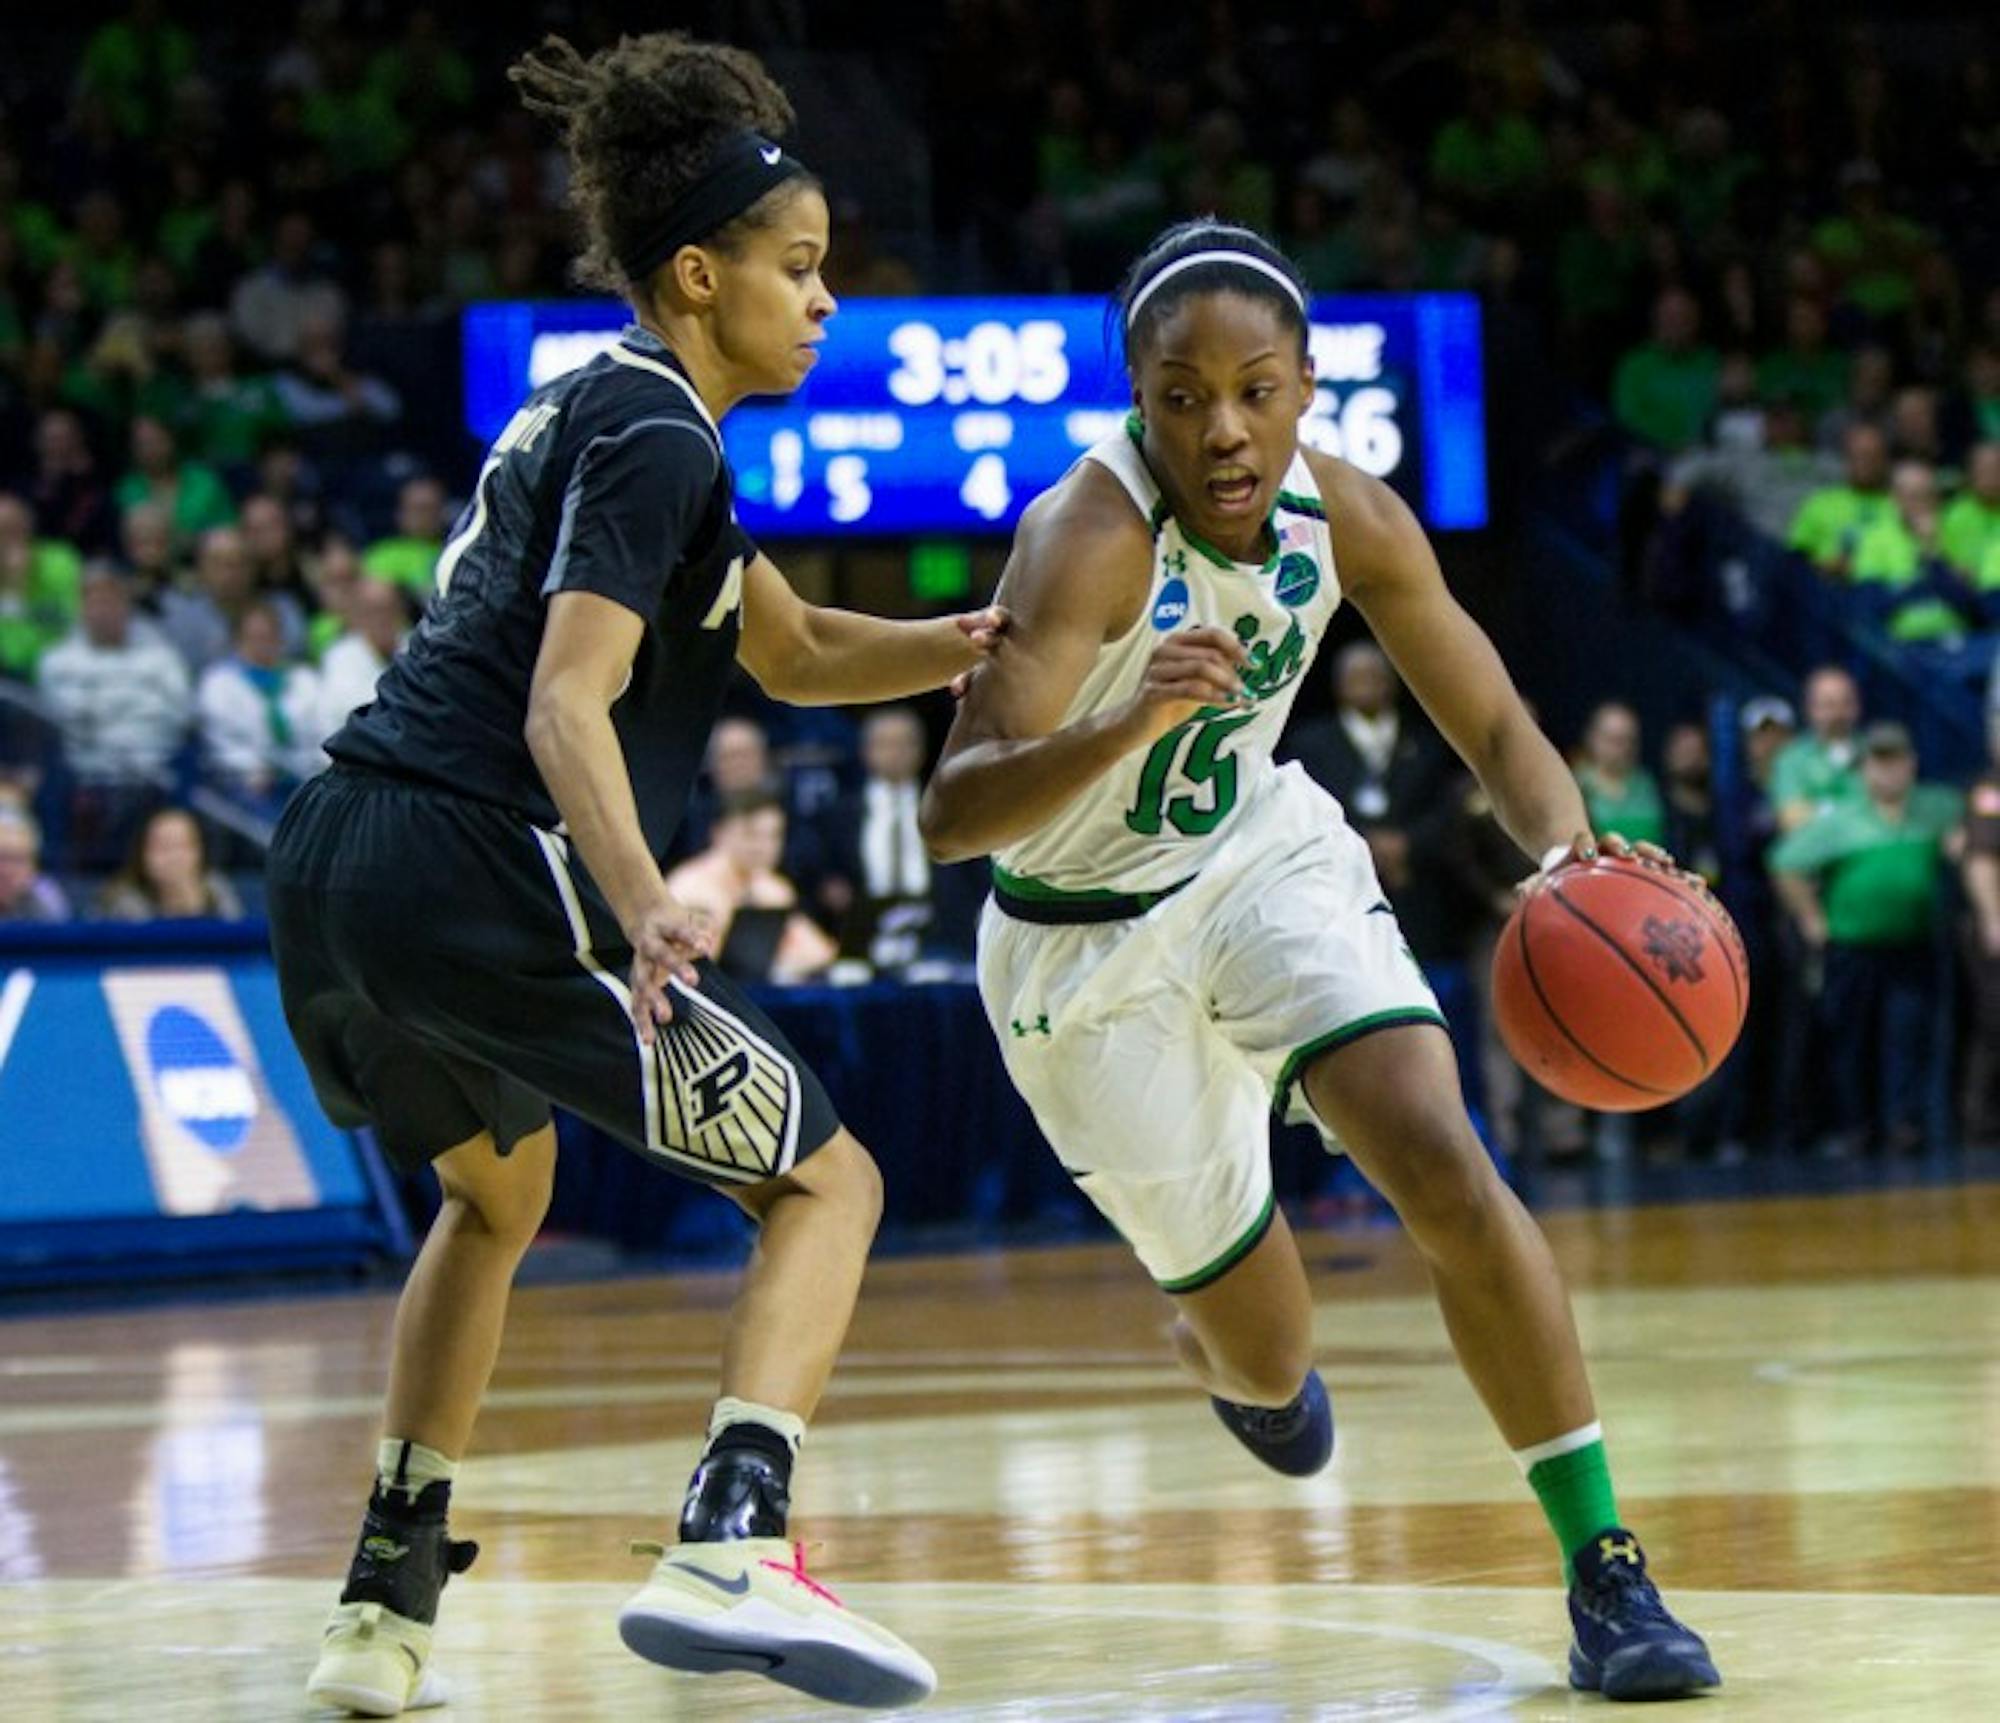 Irish senior guard Lindsay Allen drives around a defender during Notre Dame’s 88-82 overtime win over Purdue in the second round of the NCAA tournament on March 19 at Purcell Pavilion.